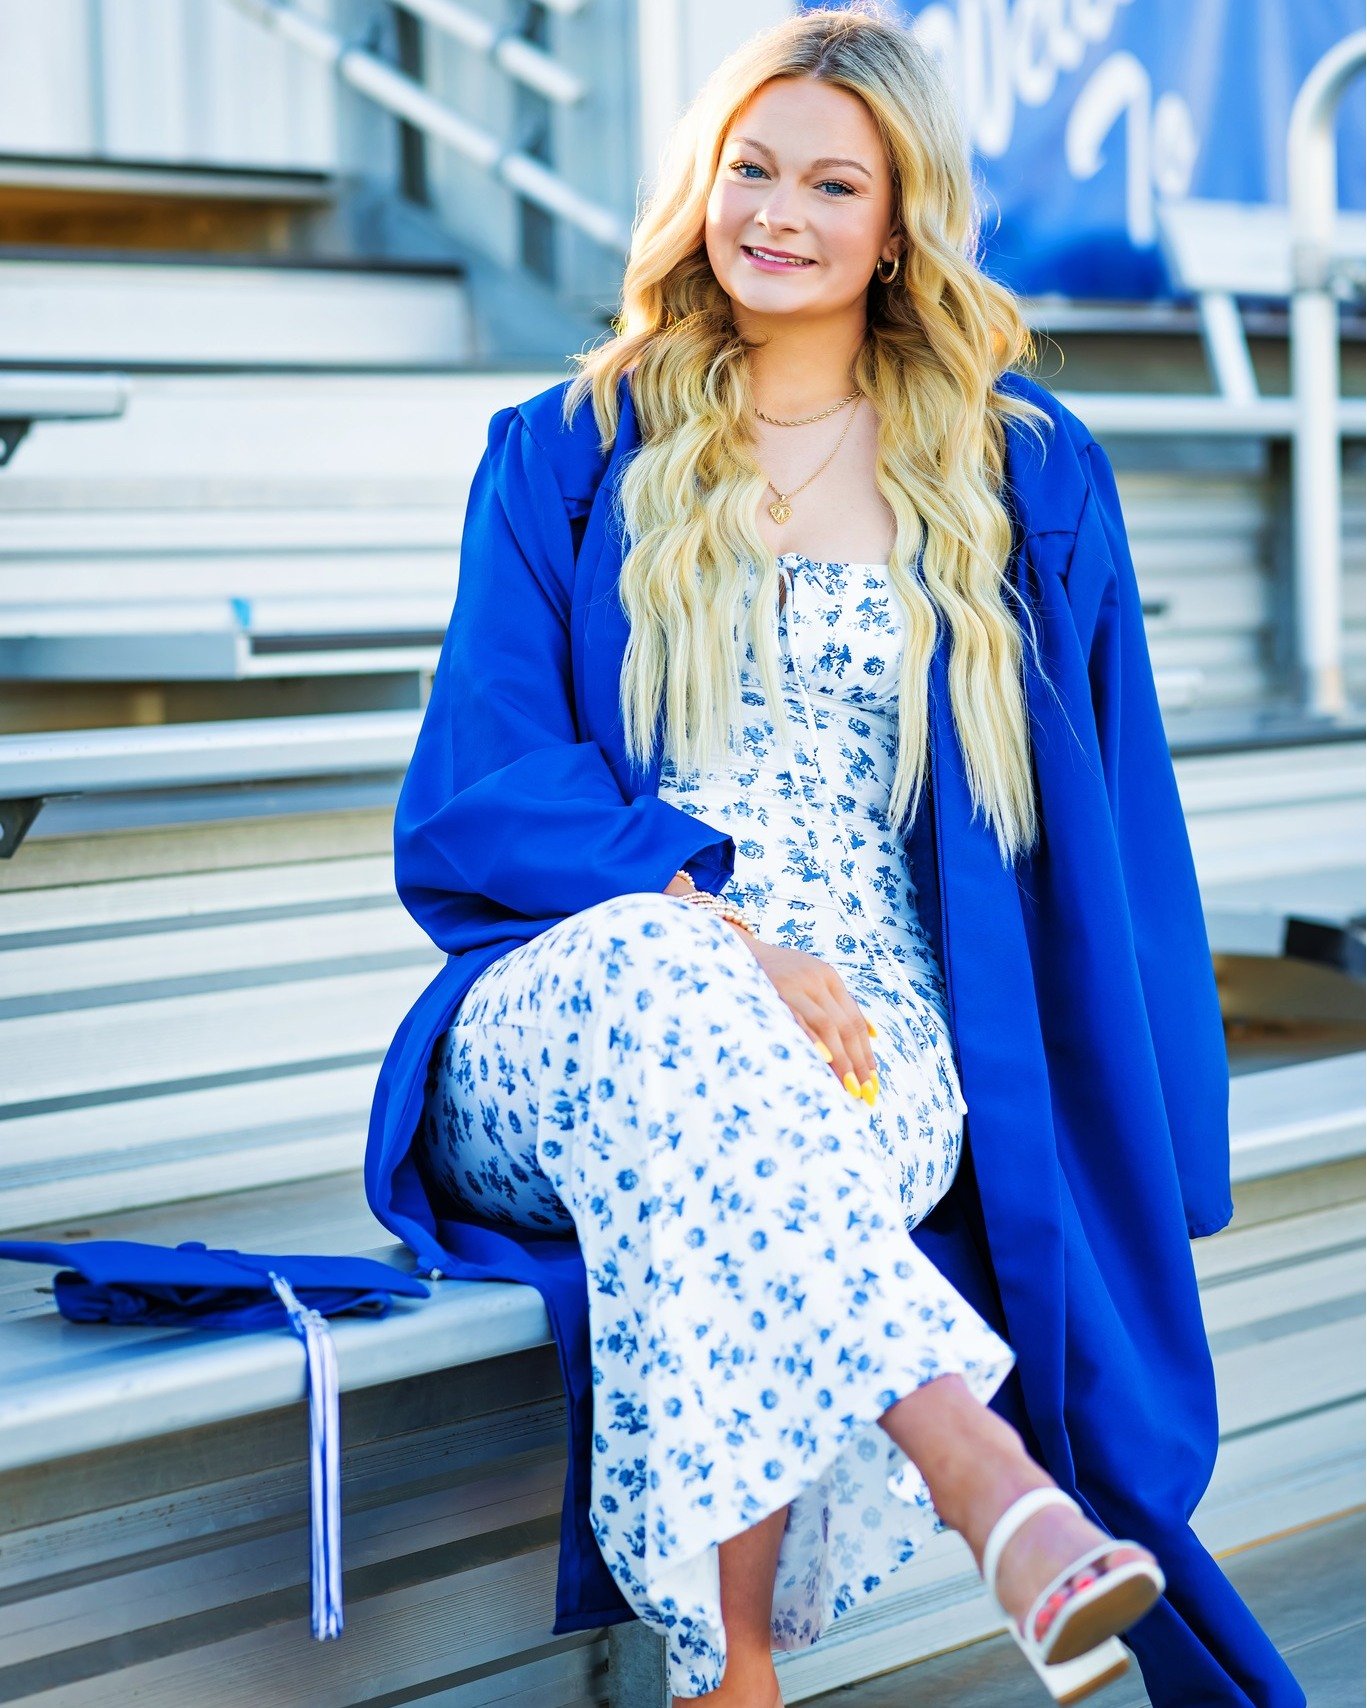 Senior Mini Session April 21st! Wrap up your Senior year with one more session. Add your cap and gown too!!

This mini is open to all Senior grads and those little grads!

Link in bio
https://portal.lacijamesphotography.com/public/appointment-schedul